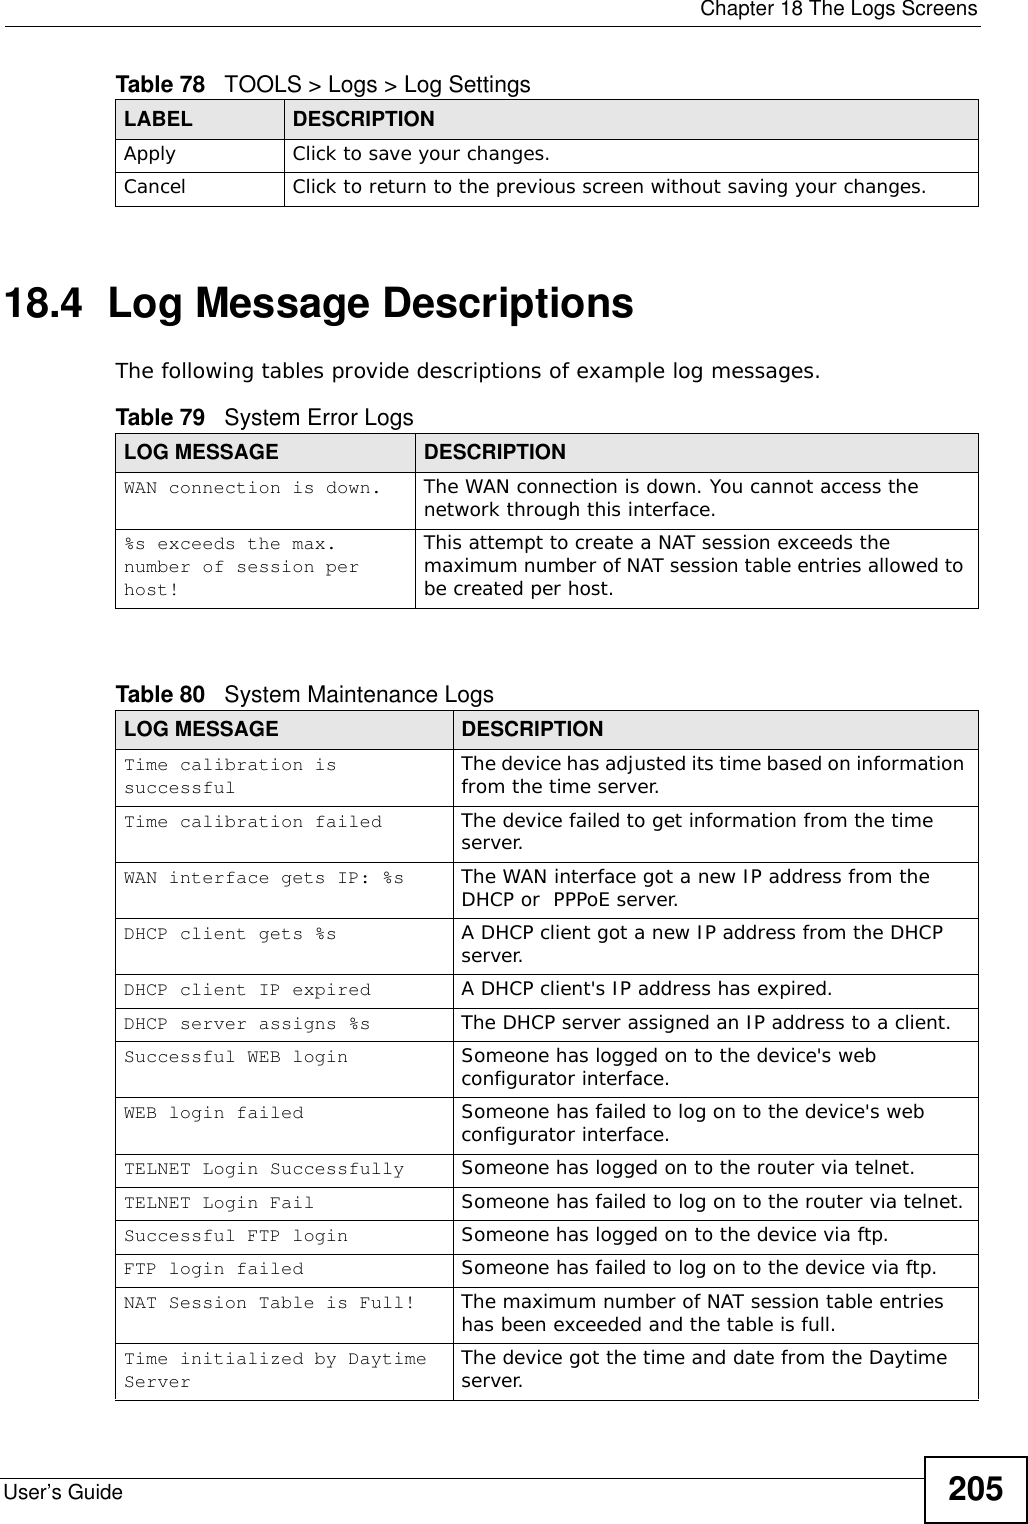  Chapter 18 The Logs ScreensUser’s Guide 20518.4  Log Message DescriptionsThe following tables provide descriptions of example log messages. Apply Click to save your changes.Cancel Click to return to the previous screen without saving your changes.Table 78   TOOLS &gt; Logs &gt; Log SettingsLABEL DESCRIPTIONTable 79   System Error LogsLOG MESSAGE DESCRIPTIONWAN connection is down. The WAN connection is down. You cannot access the network through this interface.%s exceeds the max. number of session per host!This attempt to create a NAT session exceeds the maximum number of NAT session table entries allowed to be created per host.Table 80   System Maintenance LogsLOG MESSAGE DESCRIPTIONTime calibration is successful The device has adjusted its time based on information from the time server.Time calibration failed The device failed to get information from the time server.WAN interface gets IP: %s The WAN interface got a new IP address from the DHCP or  PPPoE server.DHCP client gets %s A DHCP client got a new IP address from the DHCP server.DHCP client IP expired A DHCP client&apos;s IP address has expired.DHCP server assigns %s The DHCP server assigned an IP address to a client.Successful WEB login Someone has logged on to the device&apos;s web configurator interface.WEB login failed Someone has failed to log on to the device&apos;s web configurator interface.TELNET Login Successfully Someone has logged on to the router via telnet.TELNET Login Fail Someone has failed to log on to the router via telnet.Successful FTP login Someone has logged on to the device via ftp.FTP login failed Someone has failed to log on to the device via ftp.NAT Session Table is Full! The maximum number of NAT session table entries has been exceeded and the table is full.Time initialized by Daytime Server The device got the time and date from the Daytime server.